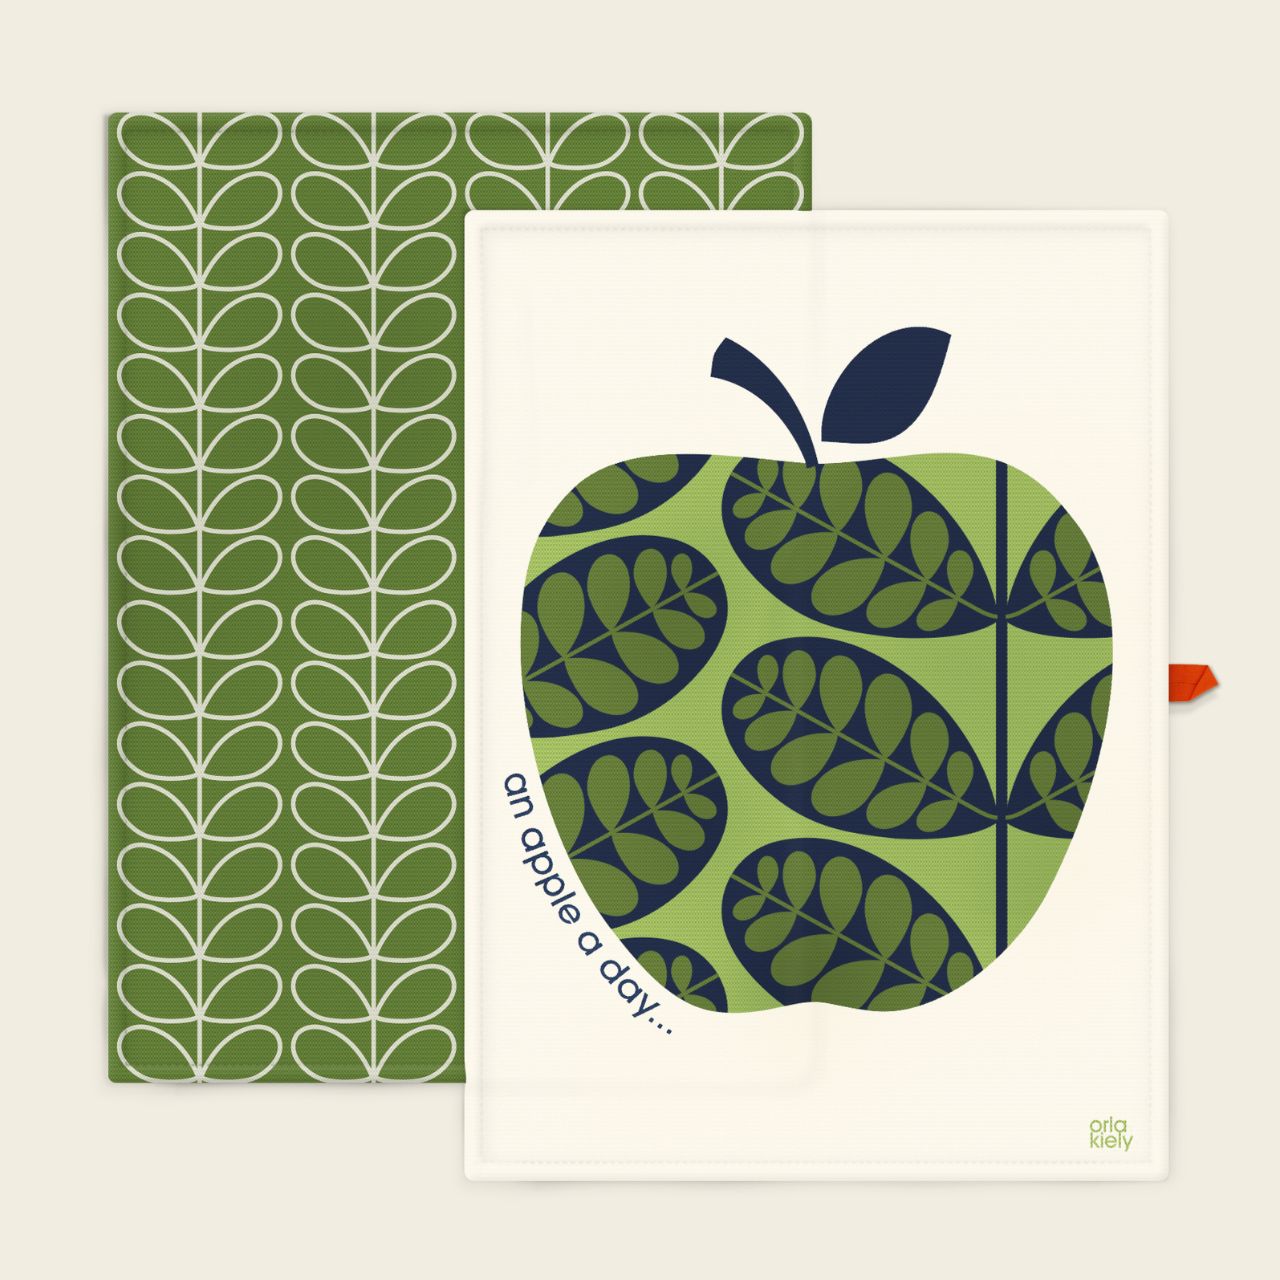 Tipperary Orla Kiely Set of 2 T-Towels - Apple A Day  Add a touch of modern style to your kitchen with this set of two Tea Towels.  The set comes with a Tea Towel that features the Linear Stem print in Green and a second Tea Towel featuring the Orla Kiely Apple. Each Tea Towel features a useful hanging loop to create an eye catching kitchen accessory even when not in use.